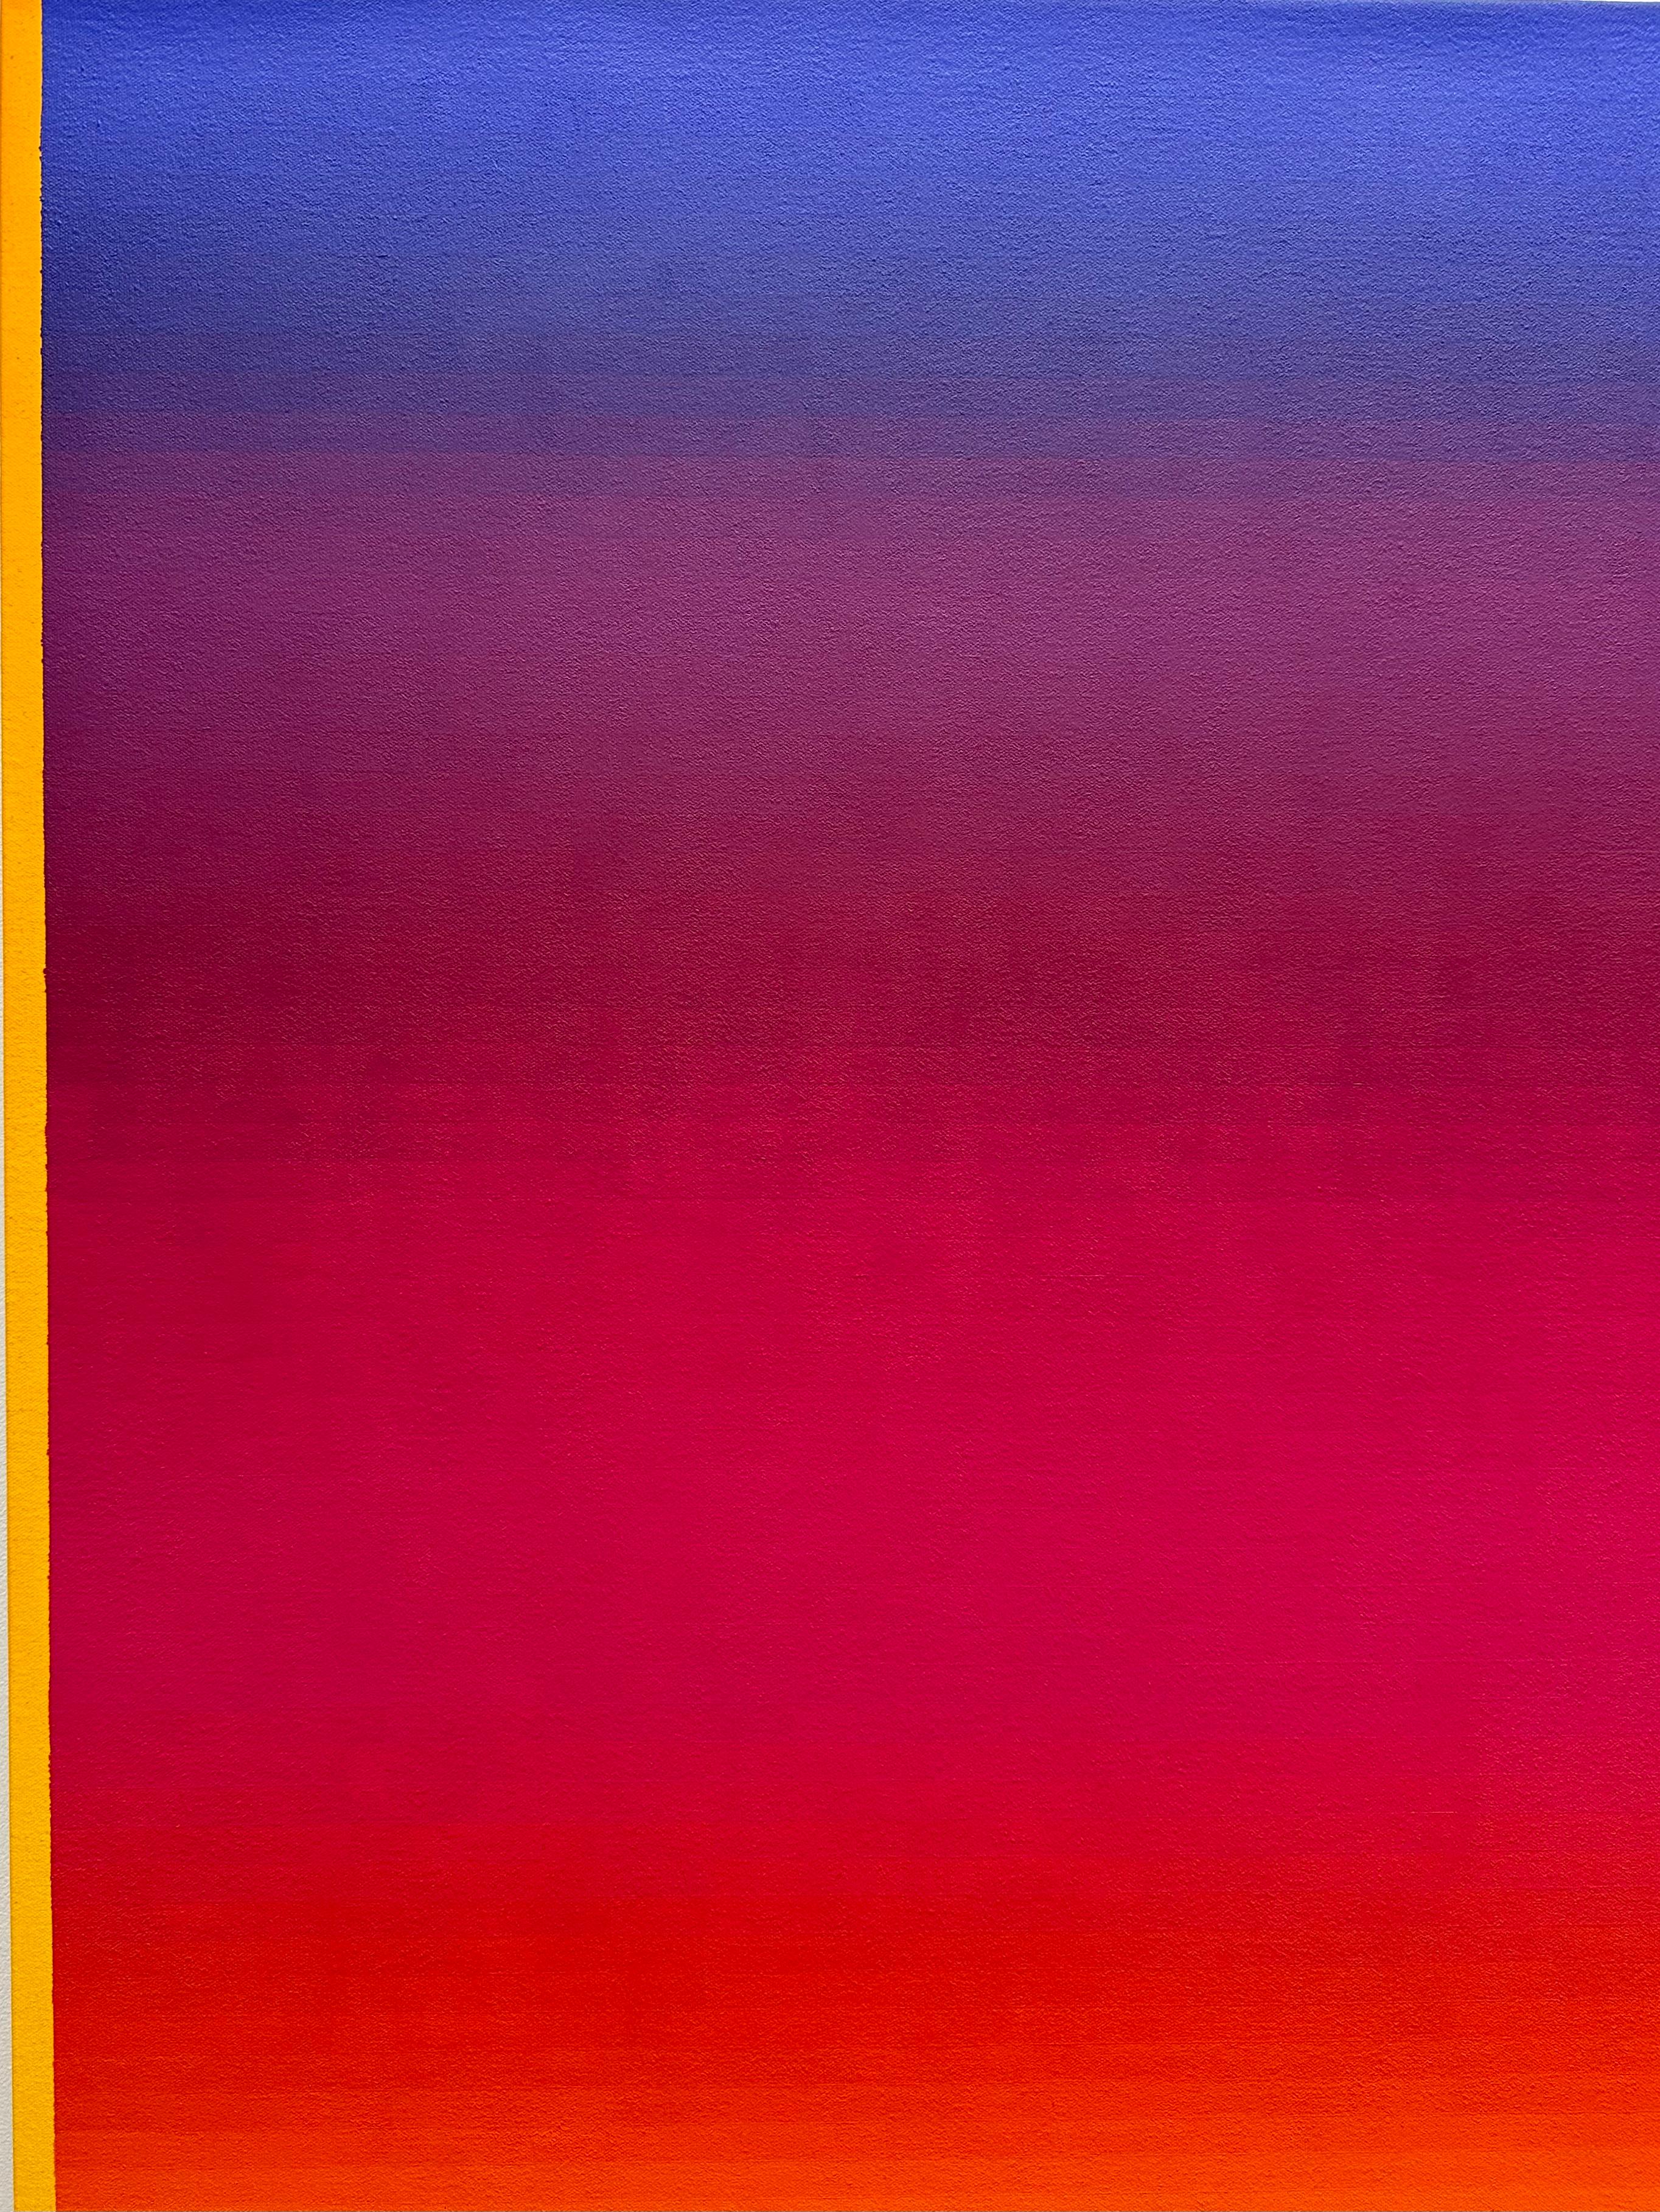 Horizontal stripes of color in gradient shades starting with hot pink in the center transitioning to dark navy cobalt blue and golden orange and luminous yellow at the edges. Signed and titled on verso.

Audrey Stone has spent her lifetime being